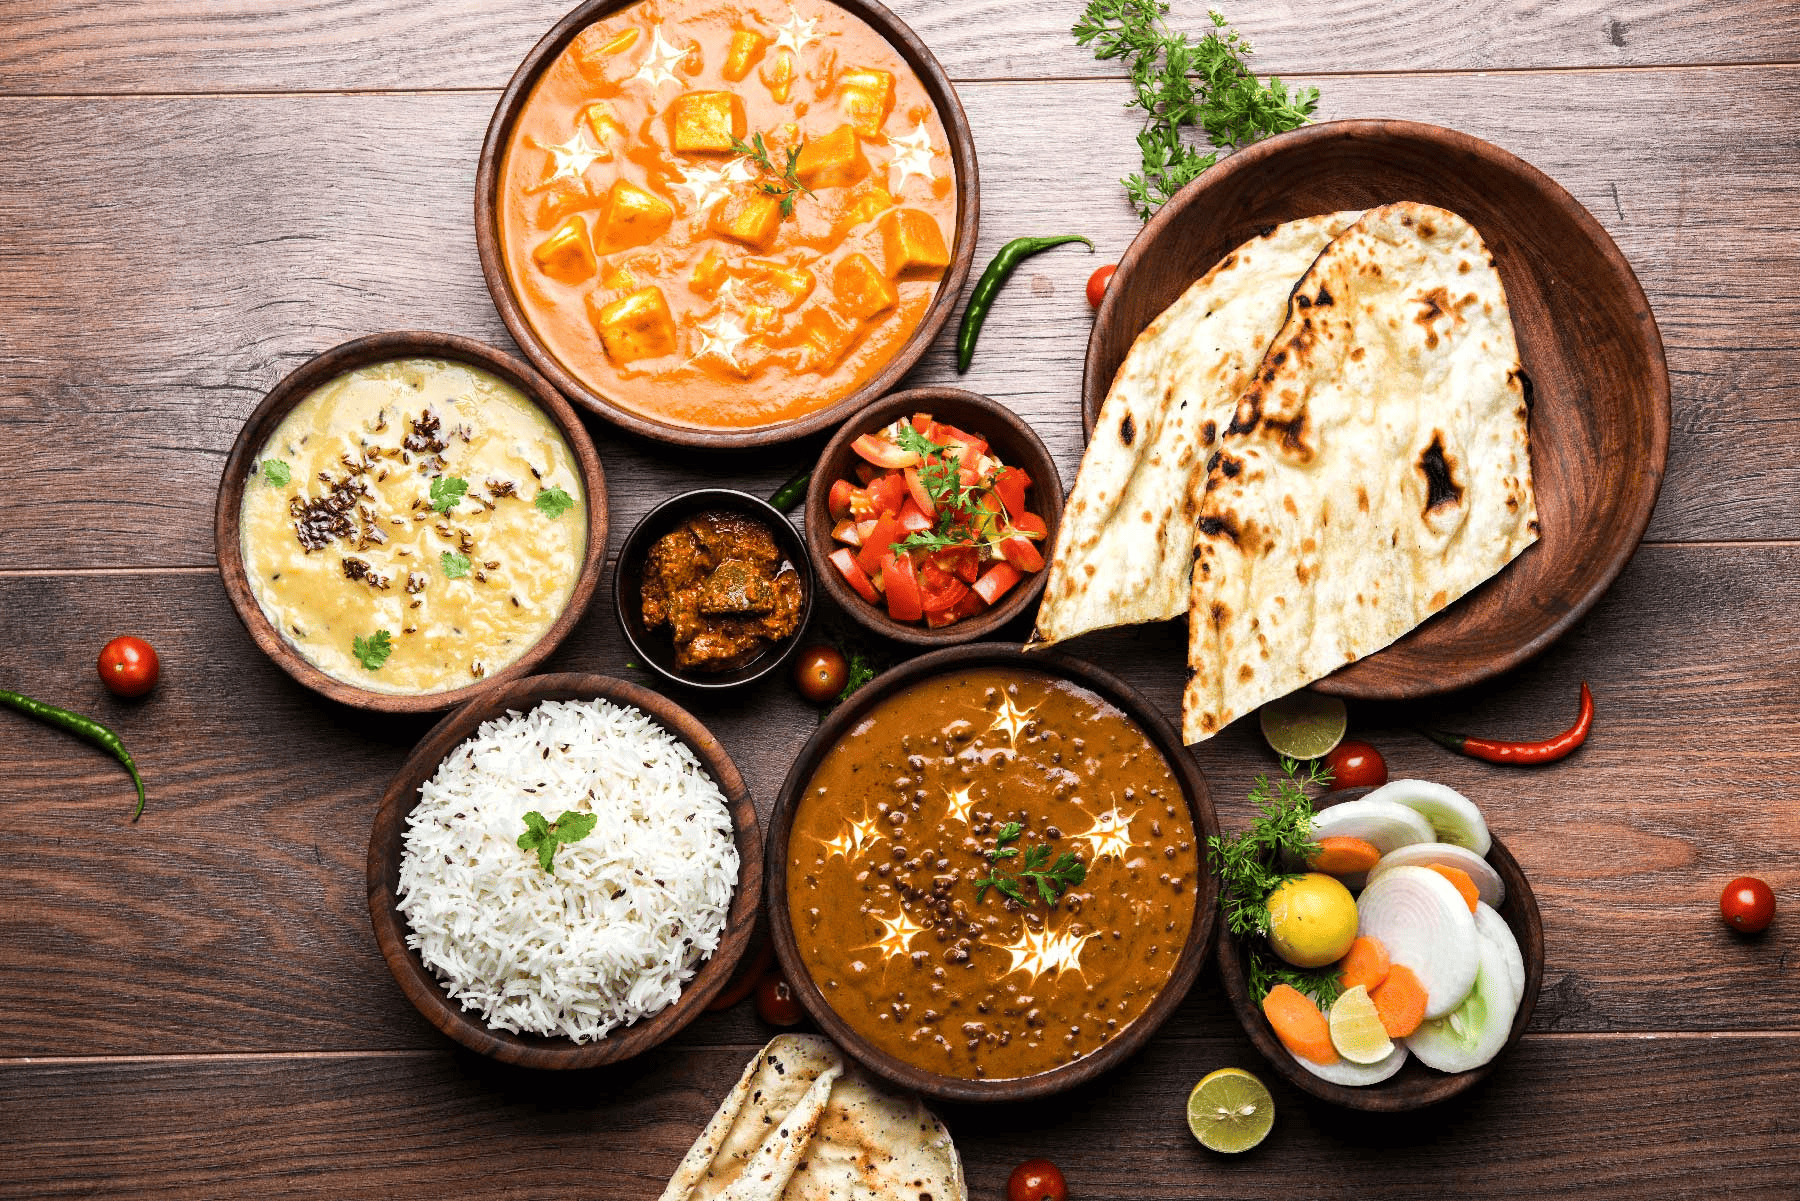 Delicious spread of Vegetarian Indian food with rice, salads, curries and daal makhni